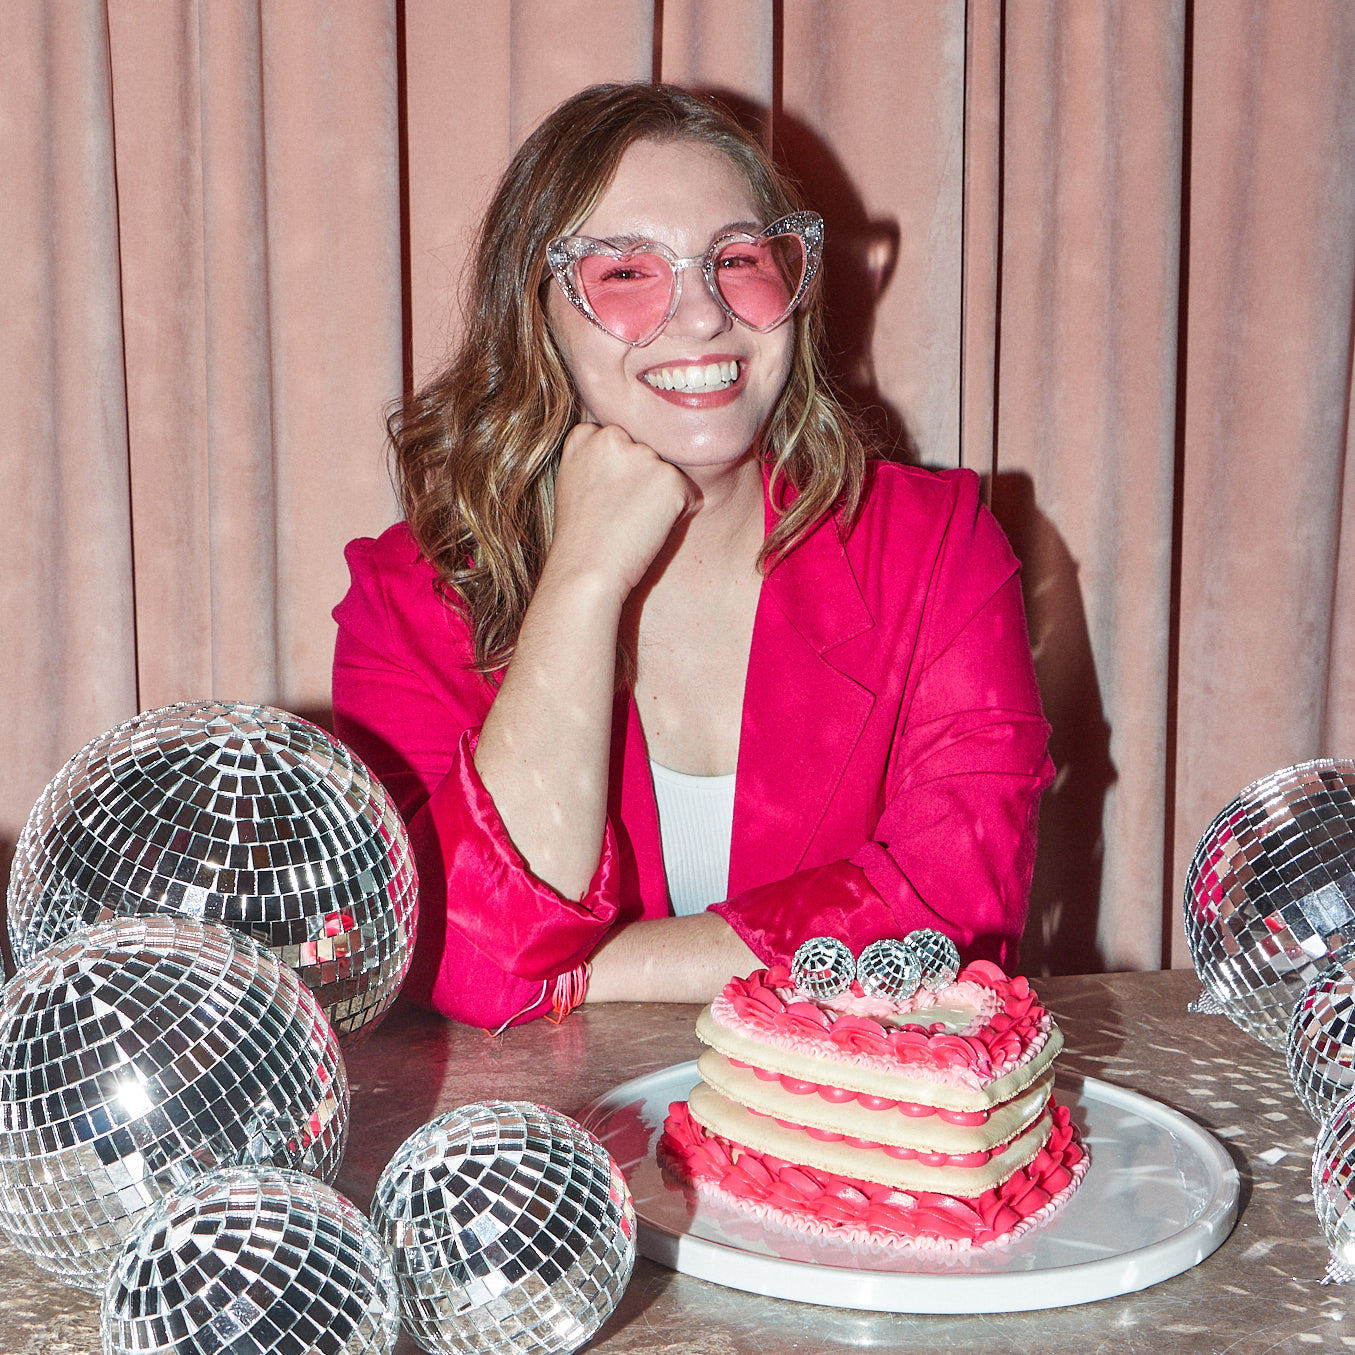 Maddie, founder and head baker at Maddie About Cake, is smiling and posting with one of her signature heart shaped macaron layer cakes, surrounded by different sized disco balls. Maddie is wearing a hot pink blazer and sparkly, pink heart shaped sunglasses.